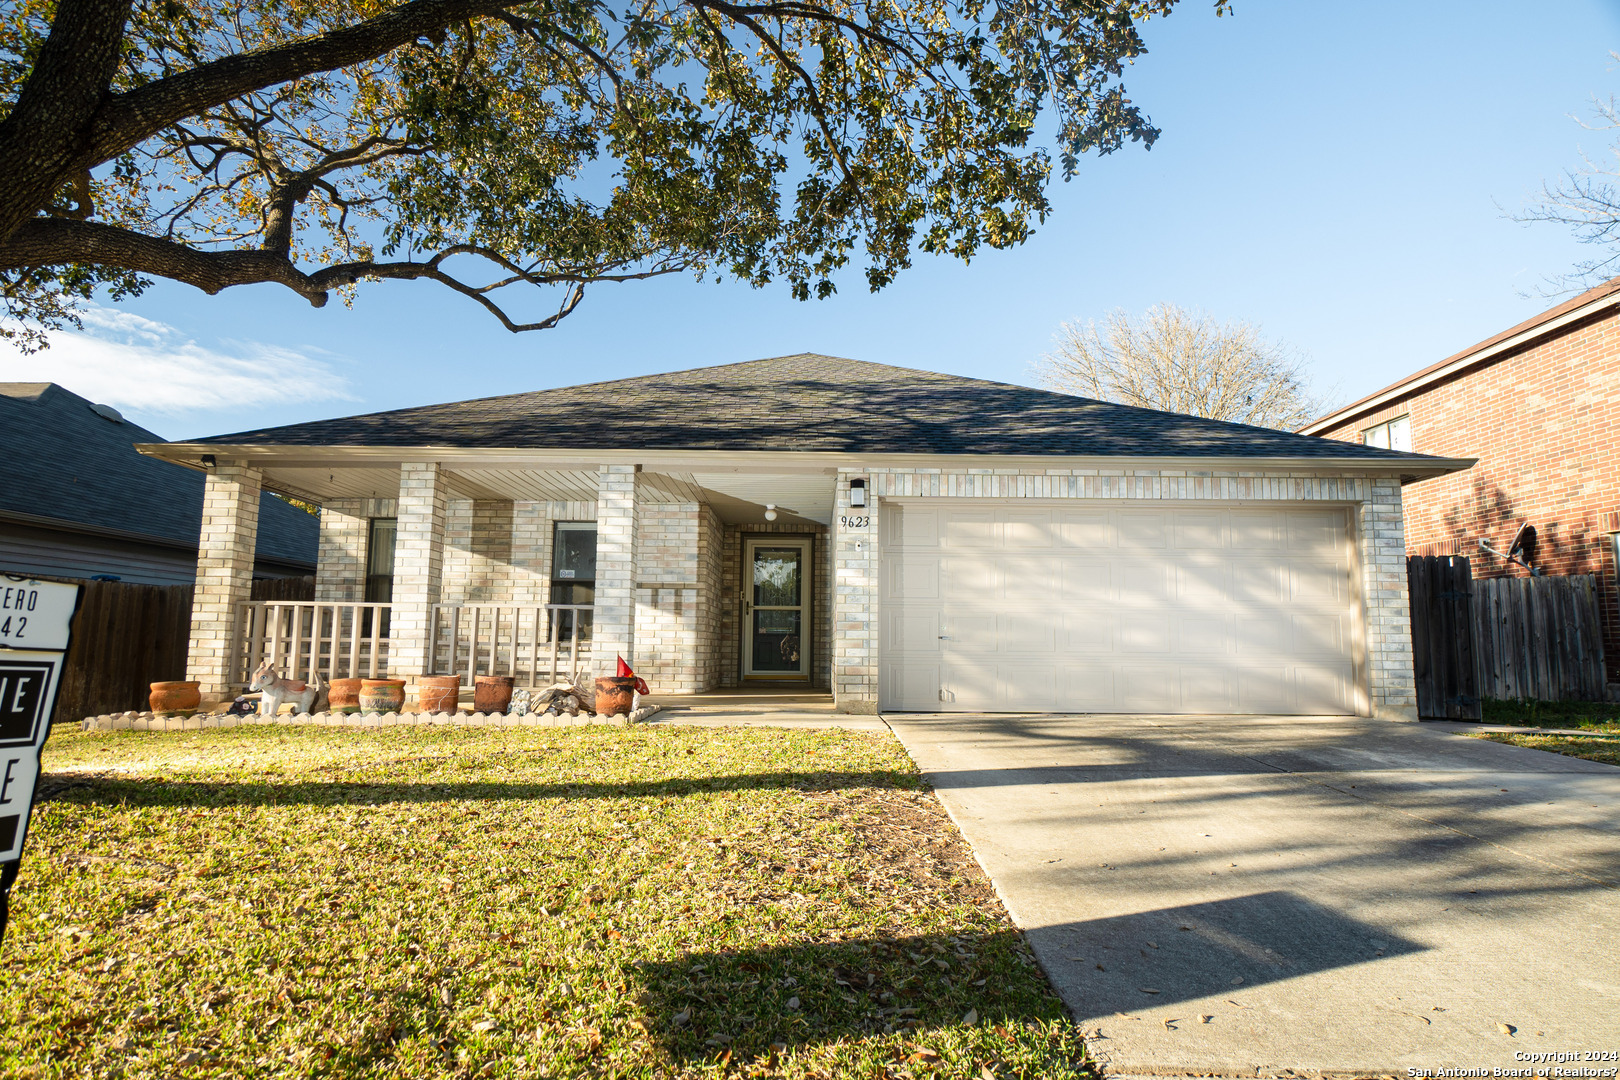 Photo of 9623 Roycroft Ave in Helotes, TX